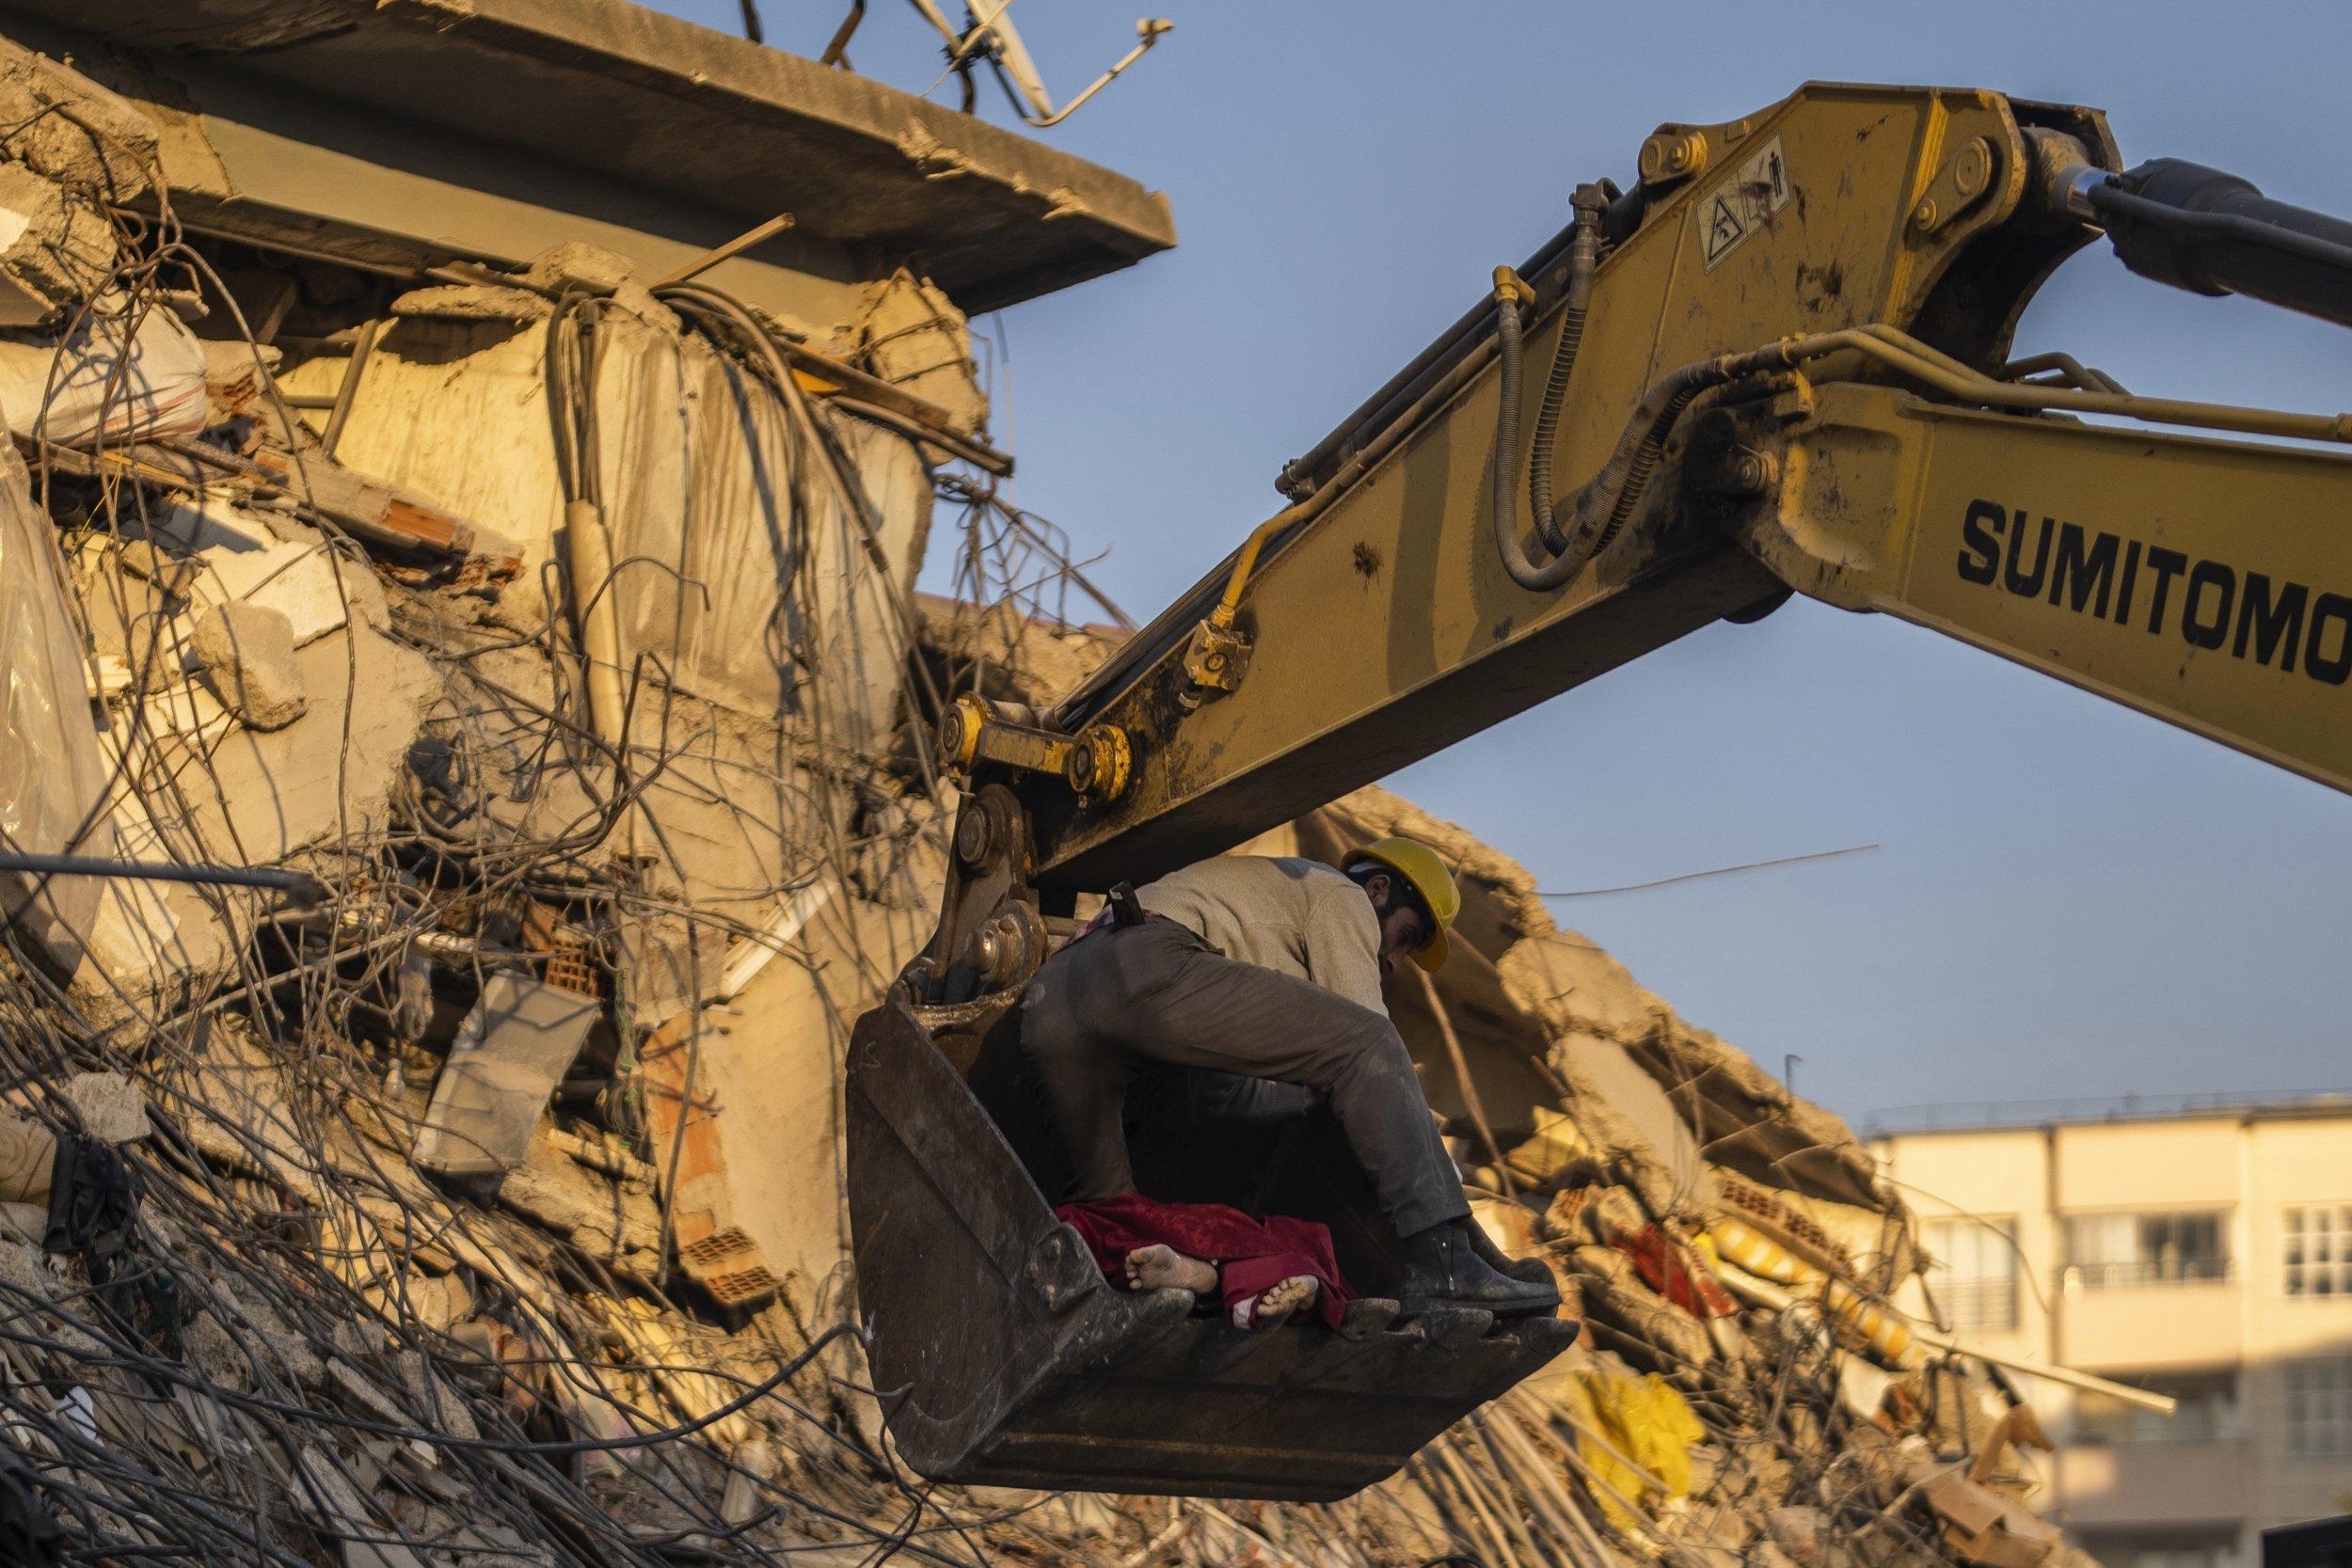  A man holds a dead body in the bucket of an excavator that is removing them from a building destroyed in a powerful earthquake in Kahramanmaras, Turkey, on Feb. 9, 2023. (AP Photo/Petros Giannakouris) 